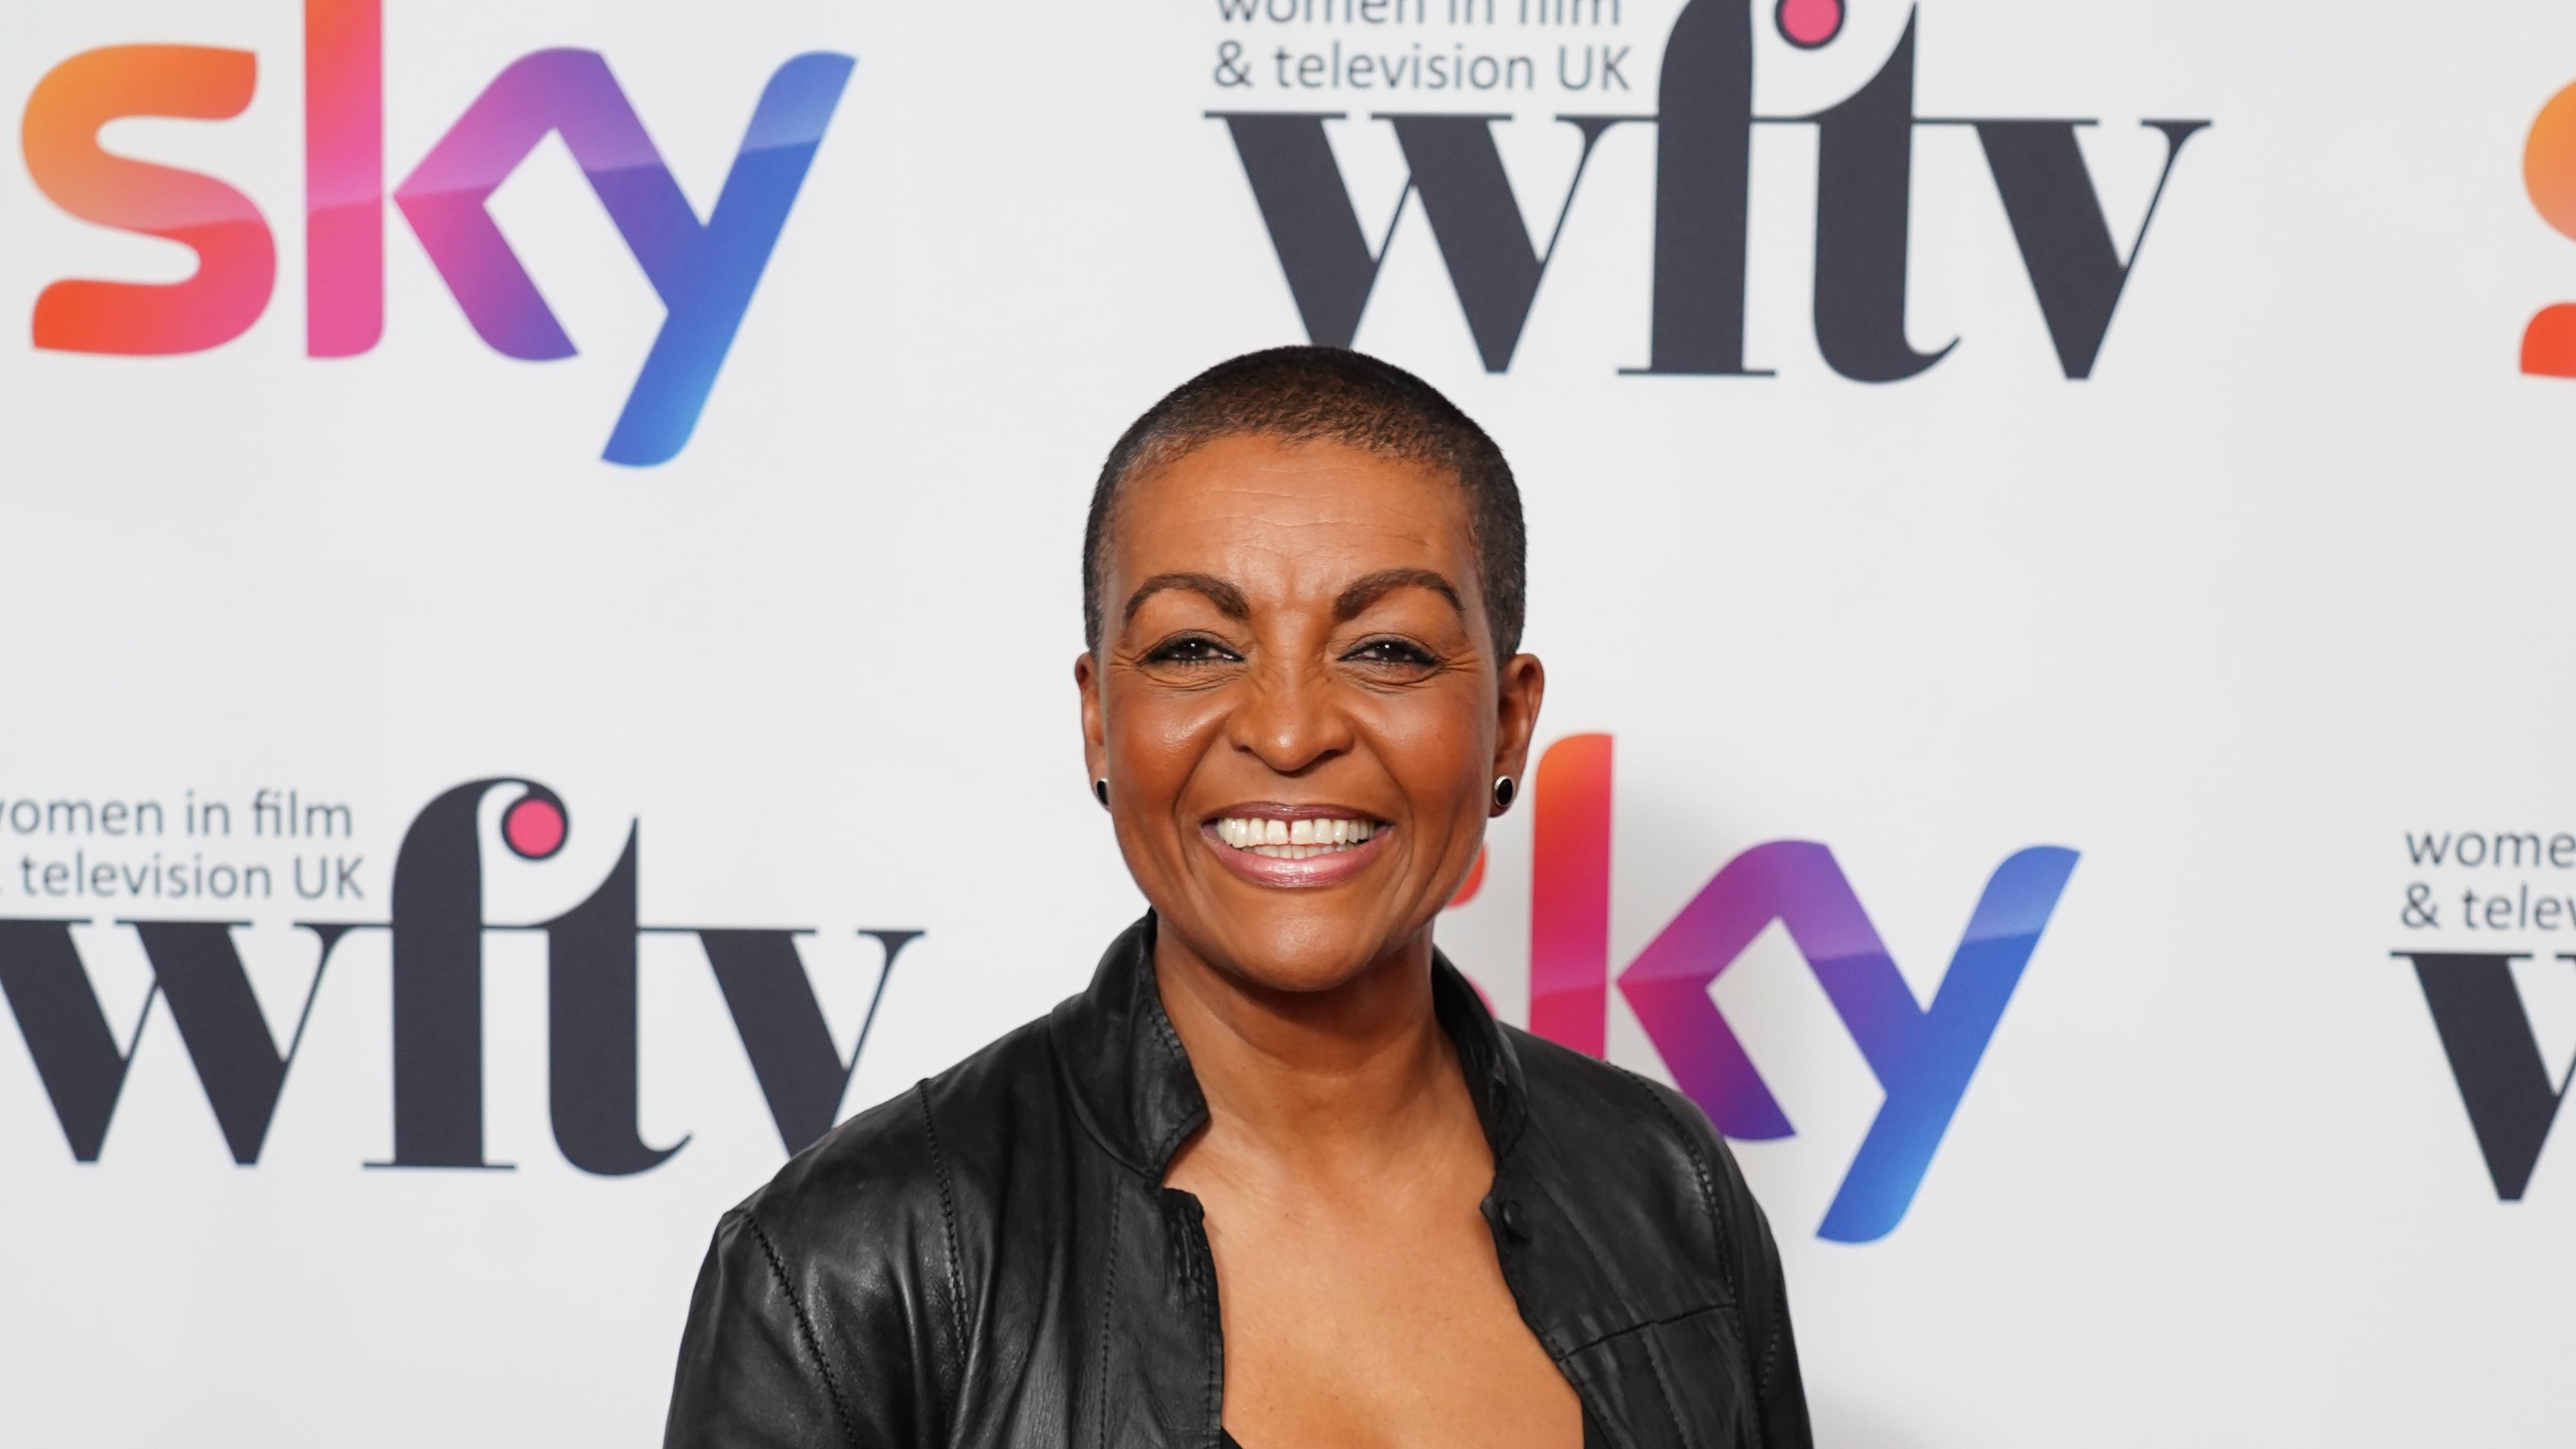 Actress Adjoa Andoh says Keir Starmer and Rachel Reeves would bring ‘steadiness’